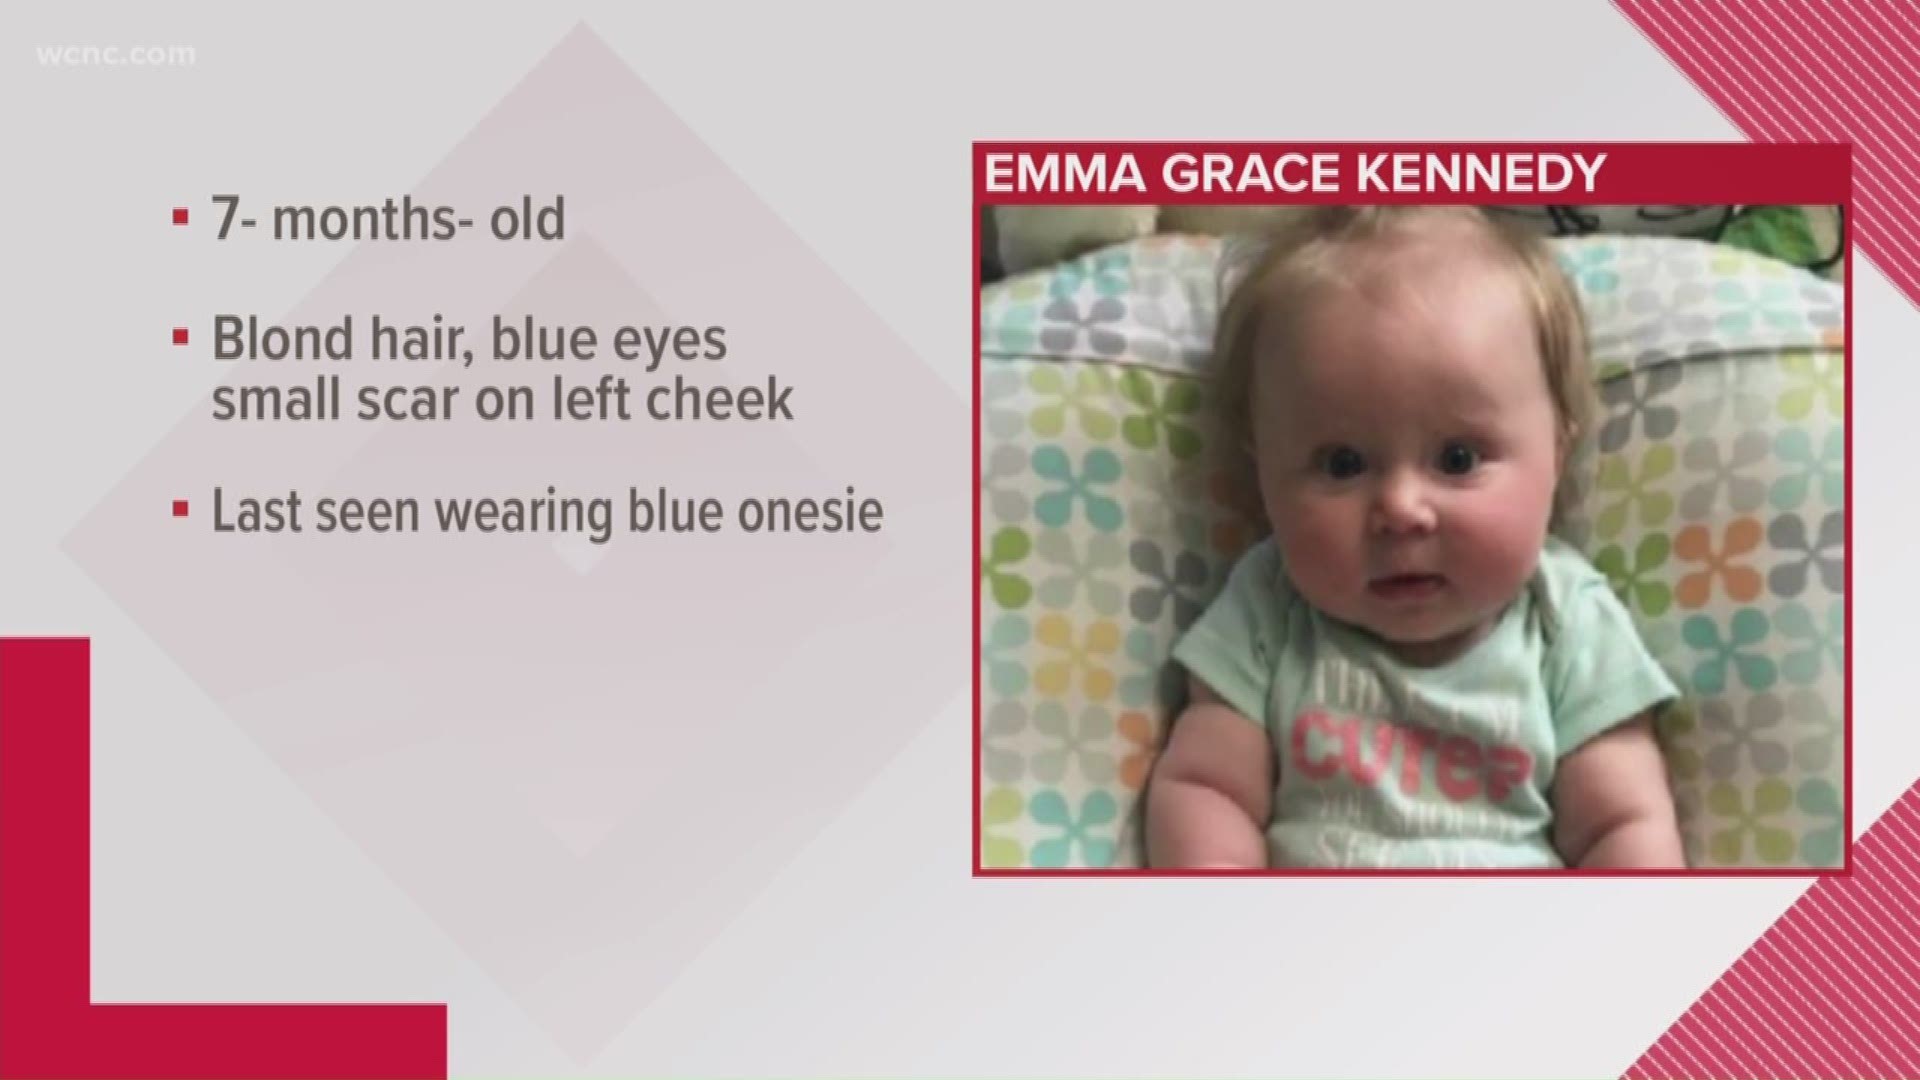 Police are searching for a 7-month-old girl at the center of an AMBER Alert.